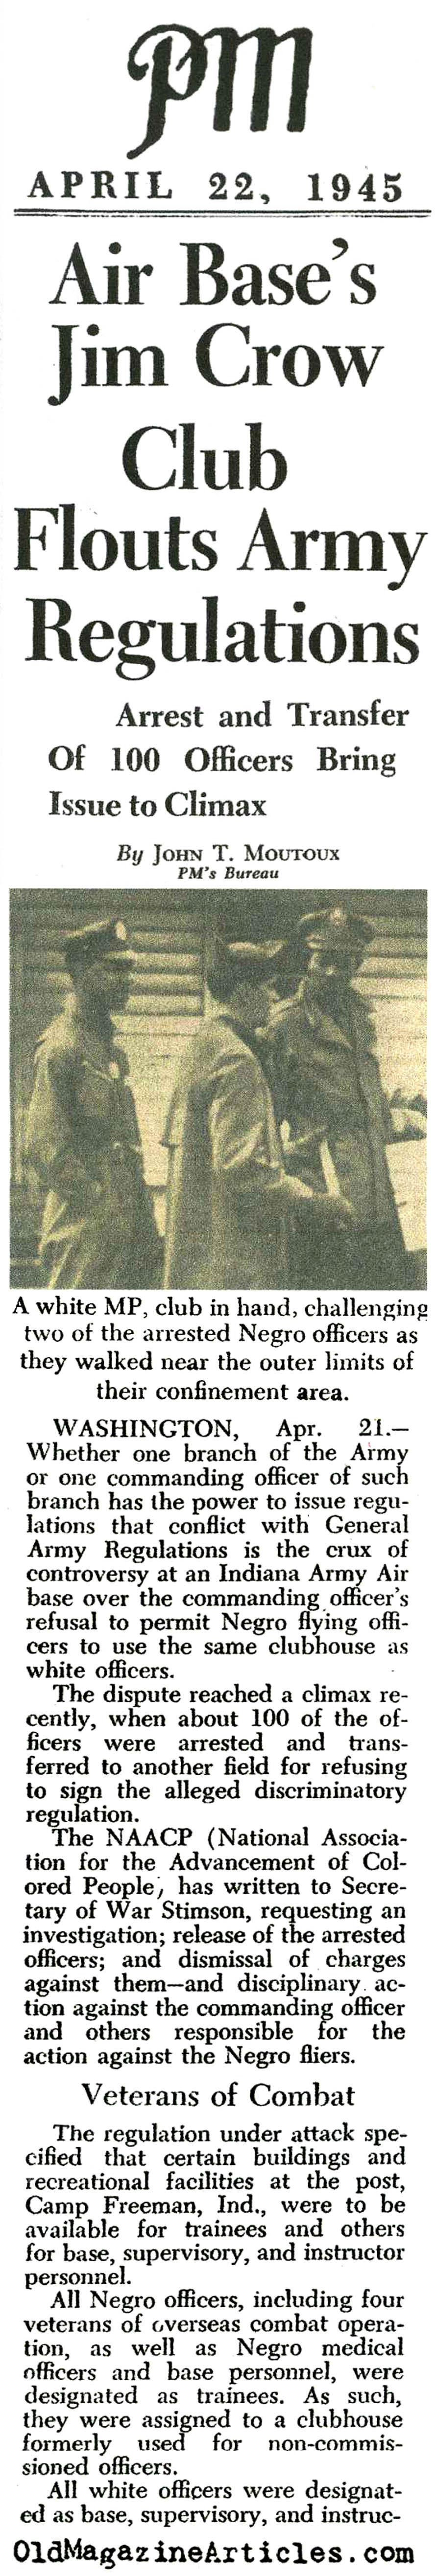 Jim Crow Officer Corps (PM Tabloid, 1945)